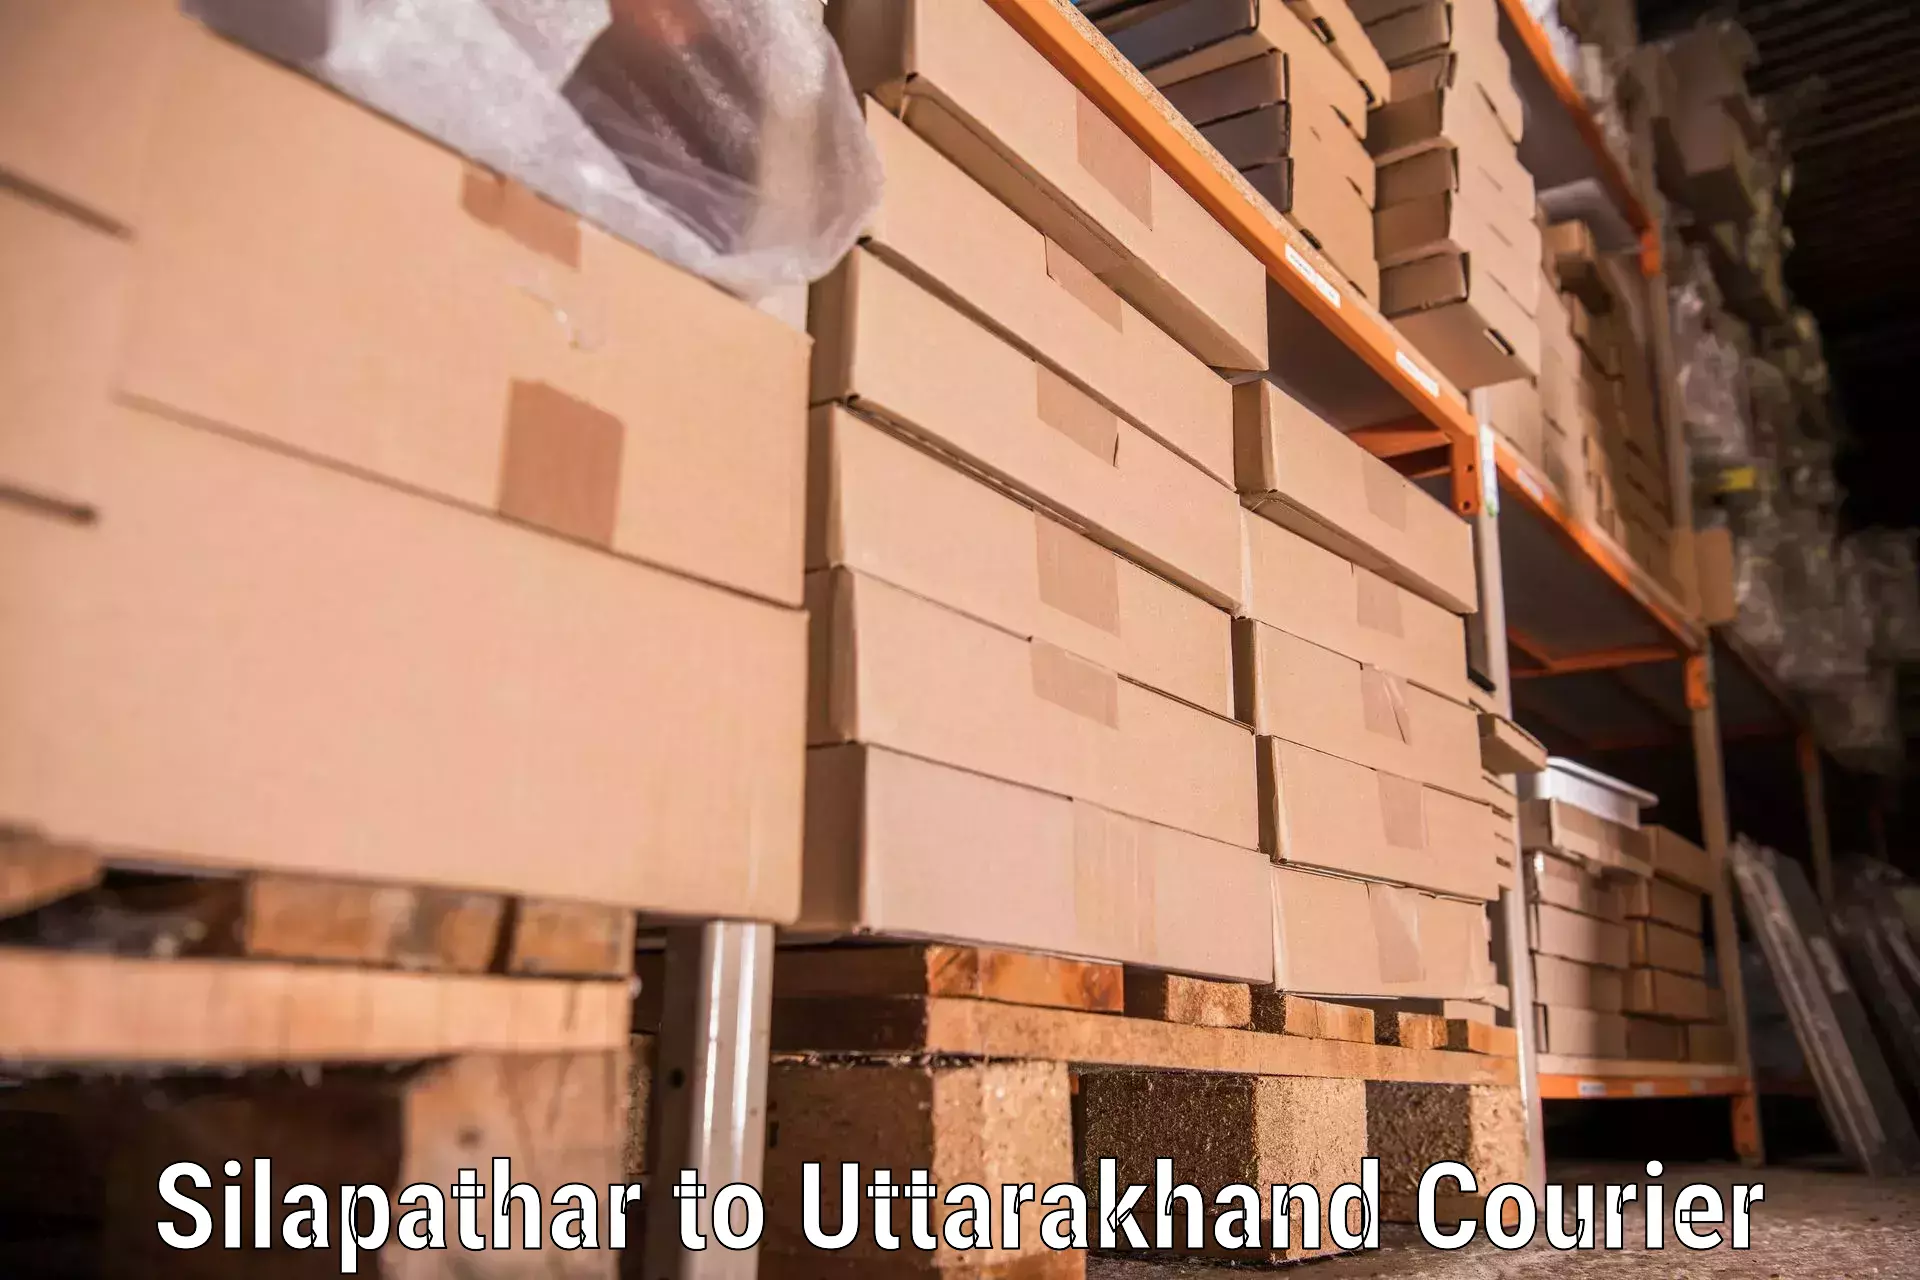 Furniture relocation experts Silapathar to Almora